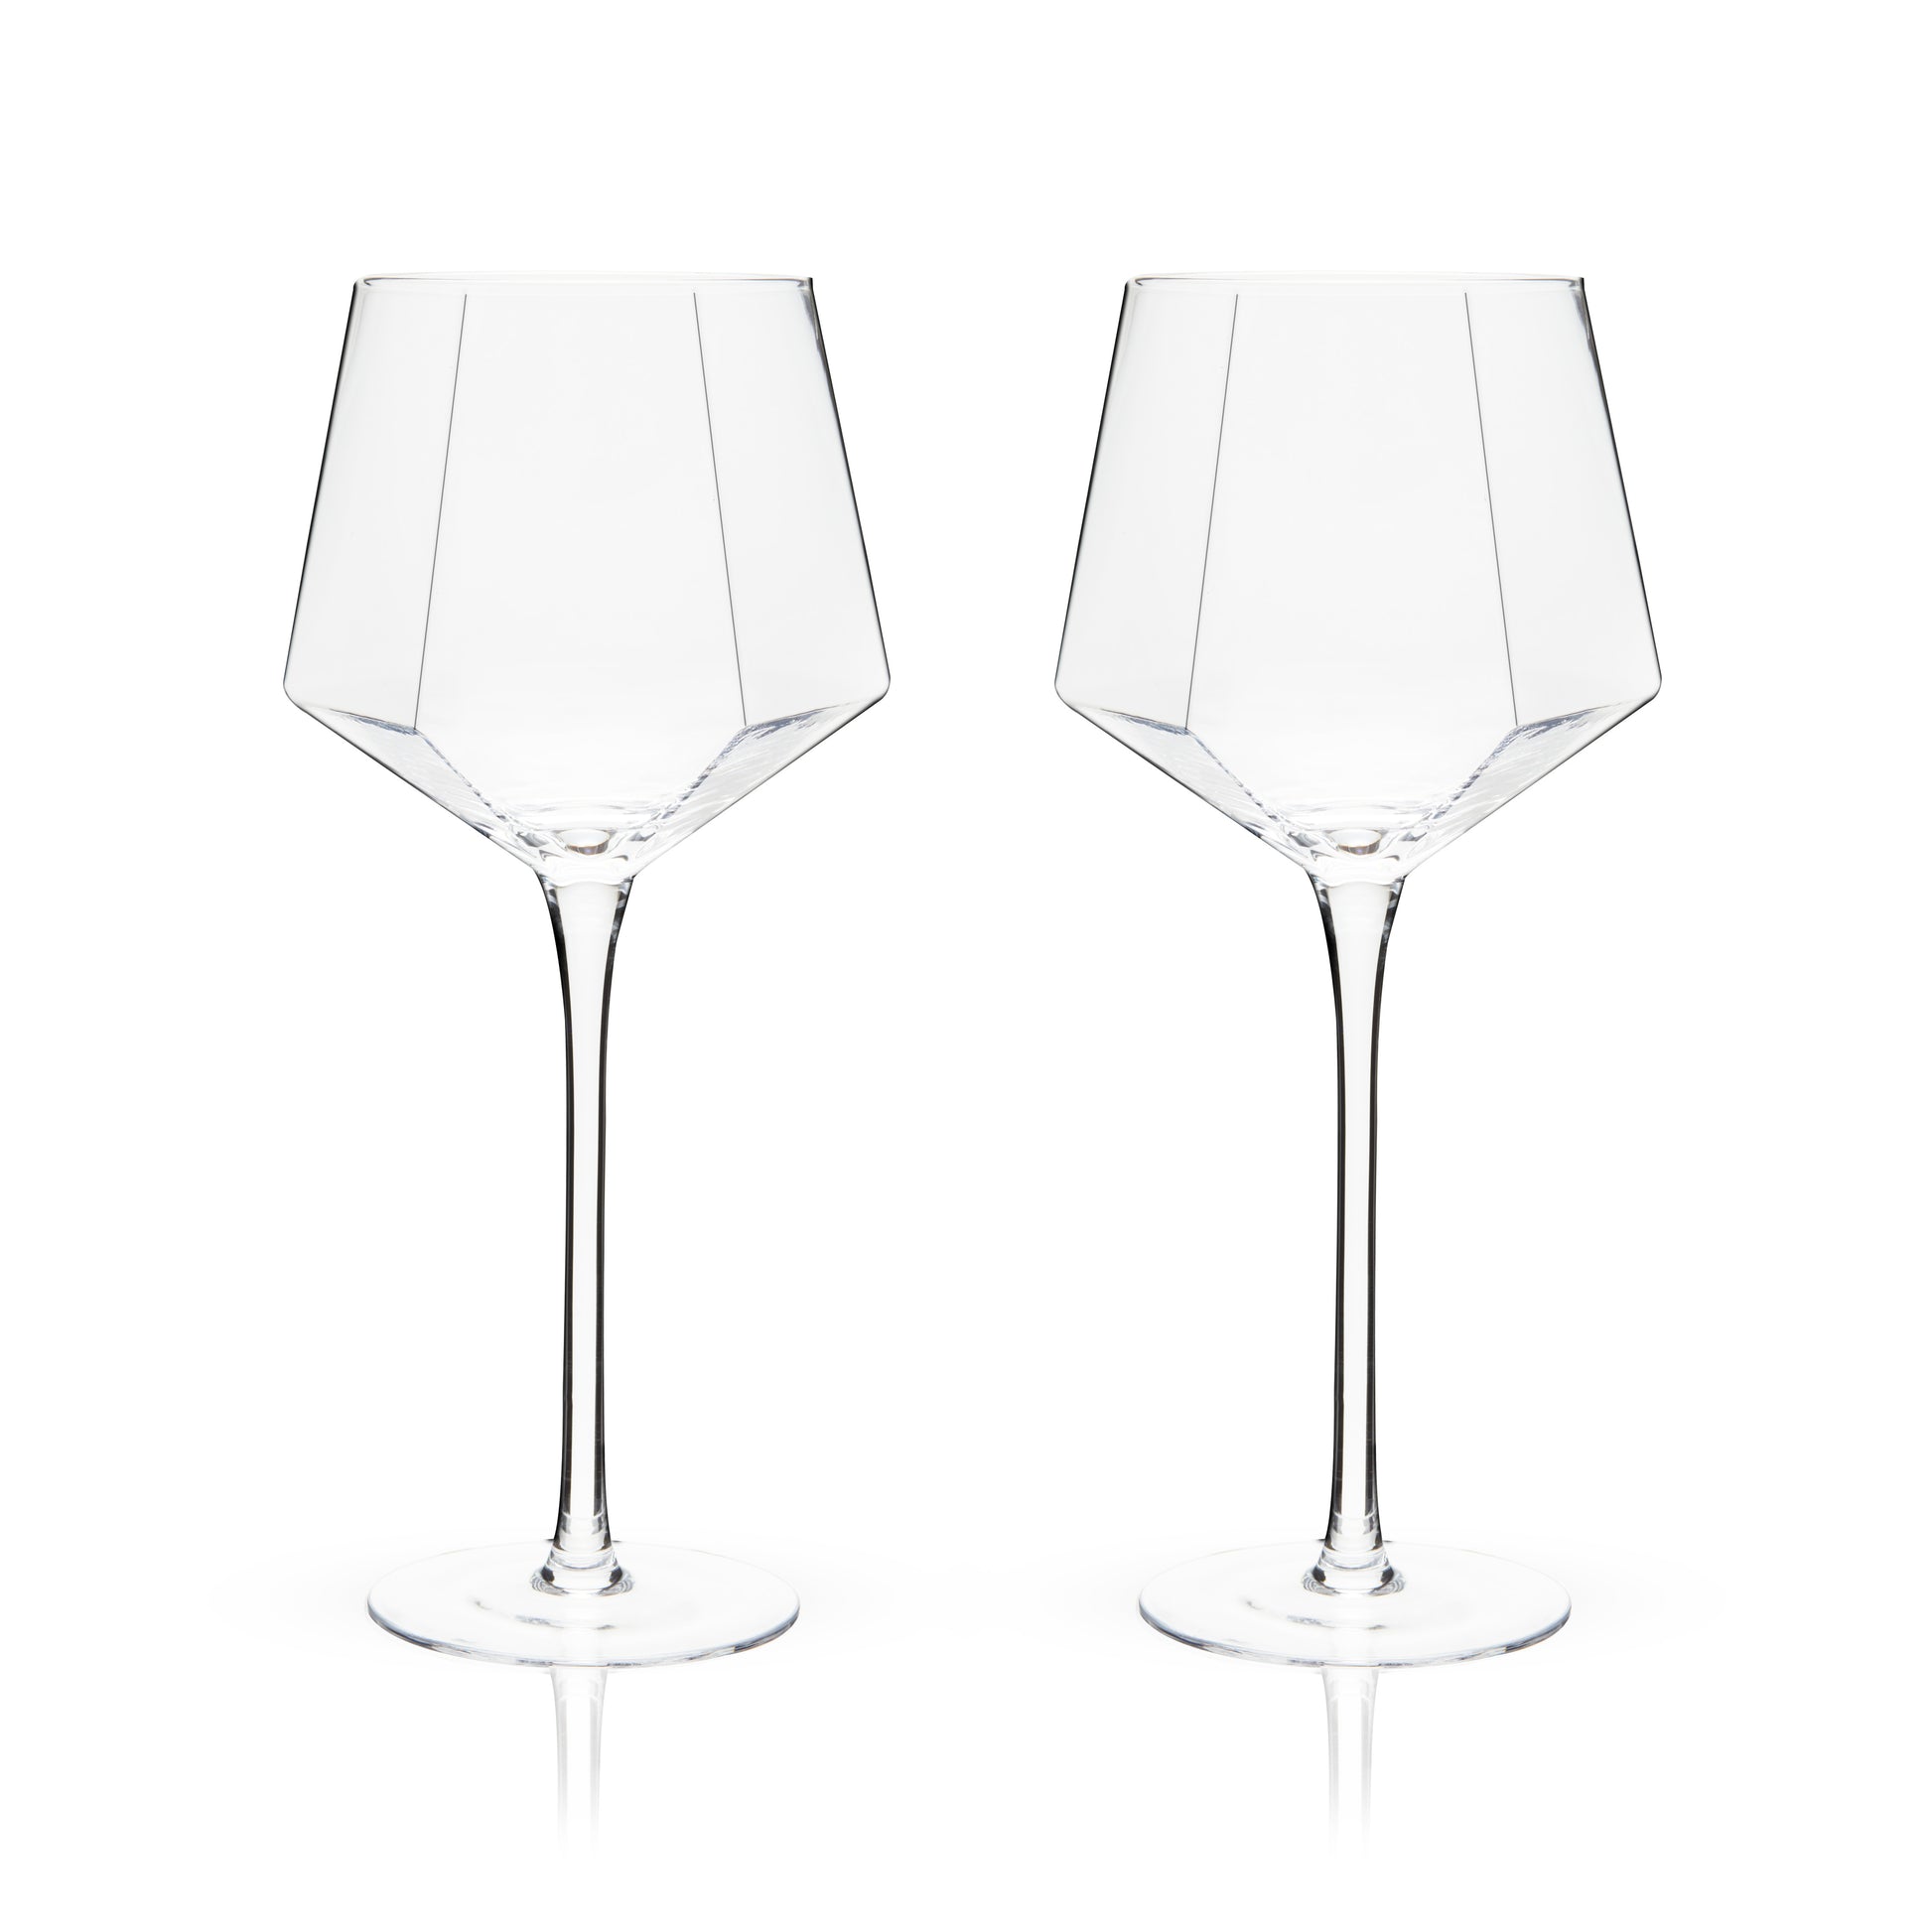 An angled base, faceted diamond design, and perfectly clear crystal give this set of wine glasses an otherworldly sparkle. Add contemporary glam to your favorite red wine, white wine, or rosé with this stemmed glassware.